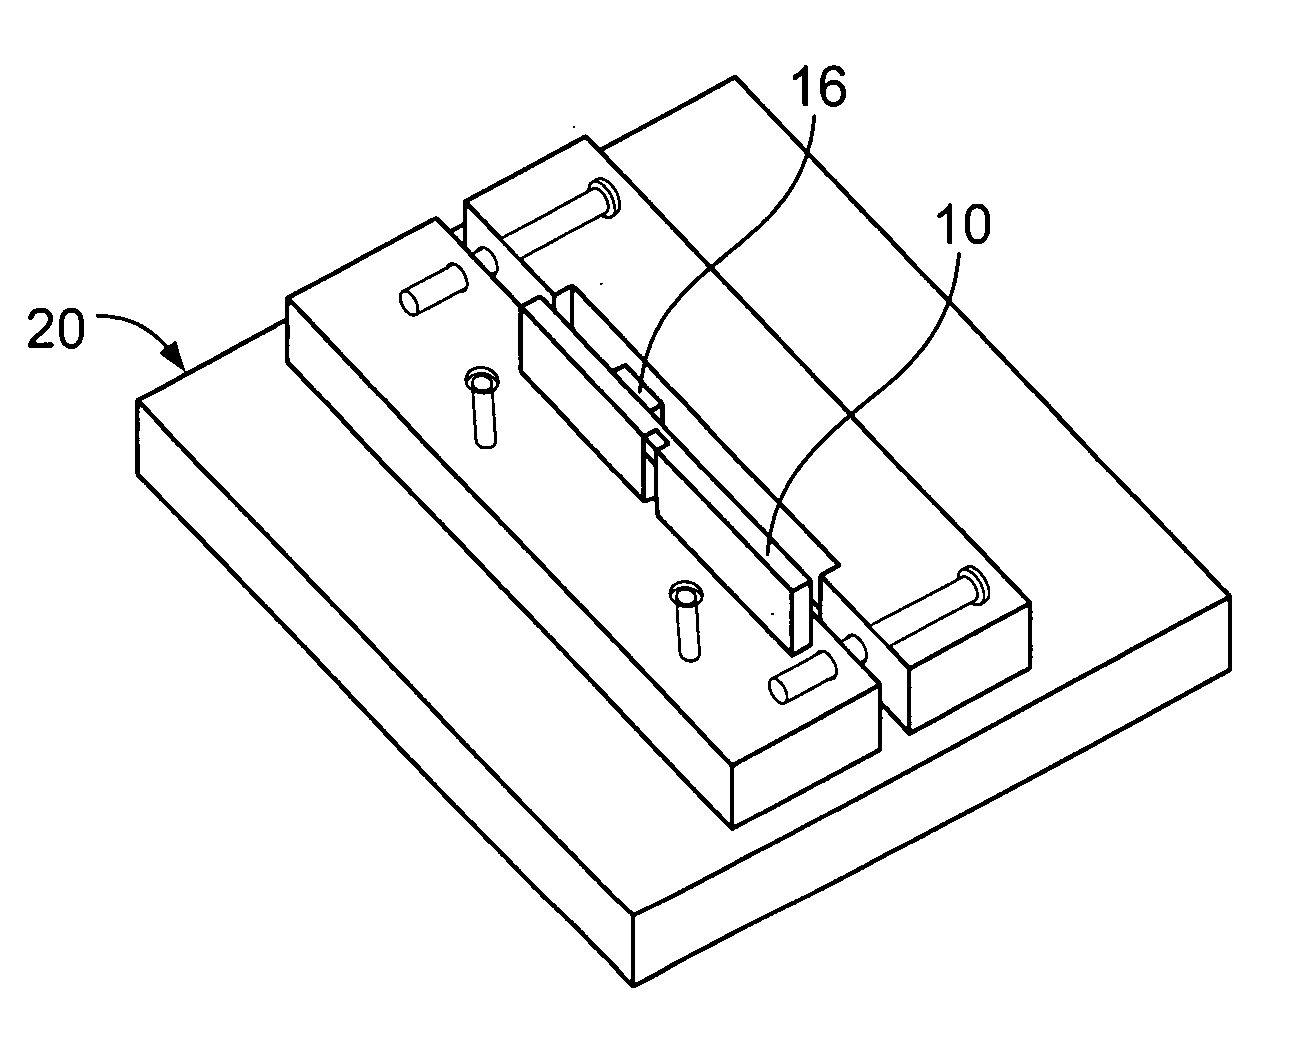 Flow-through apparatus for microscopic investigation of dissolution pharmaceutical solids